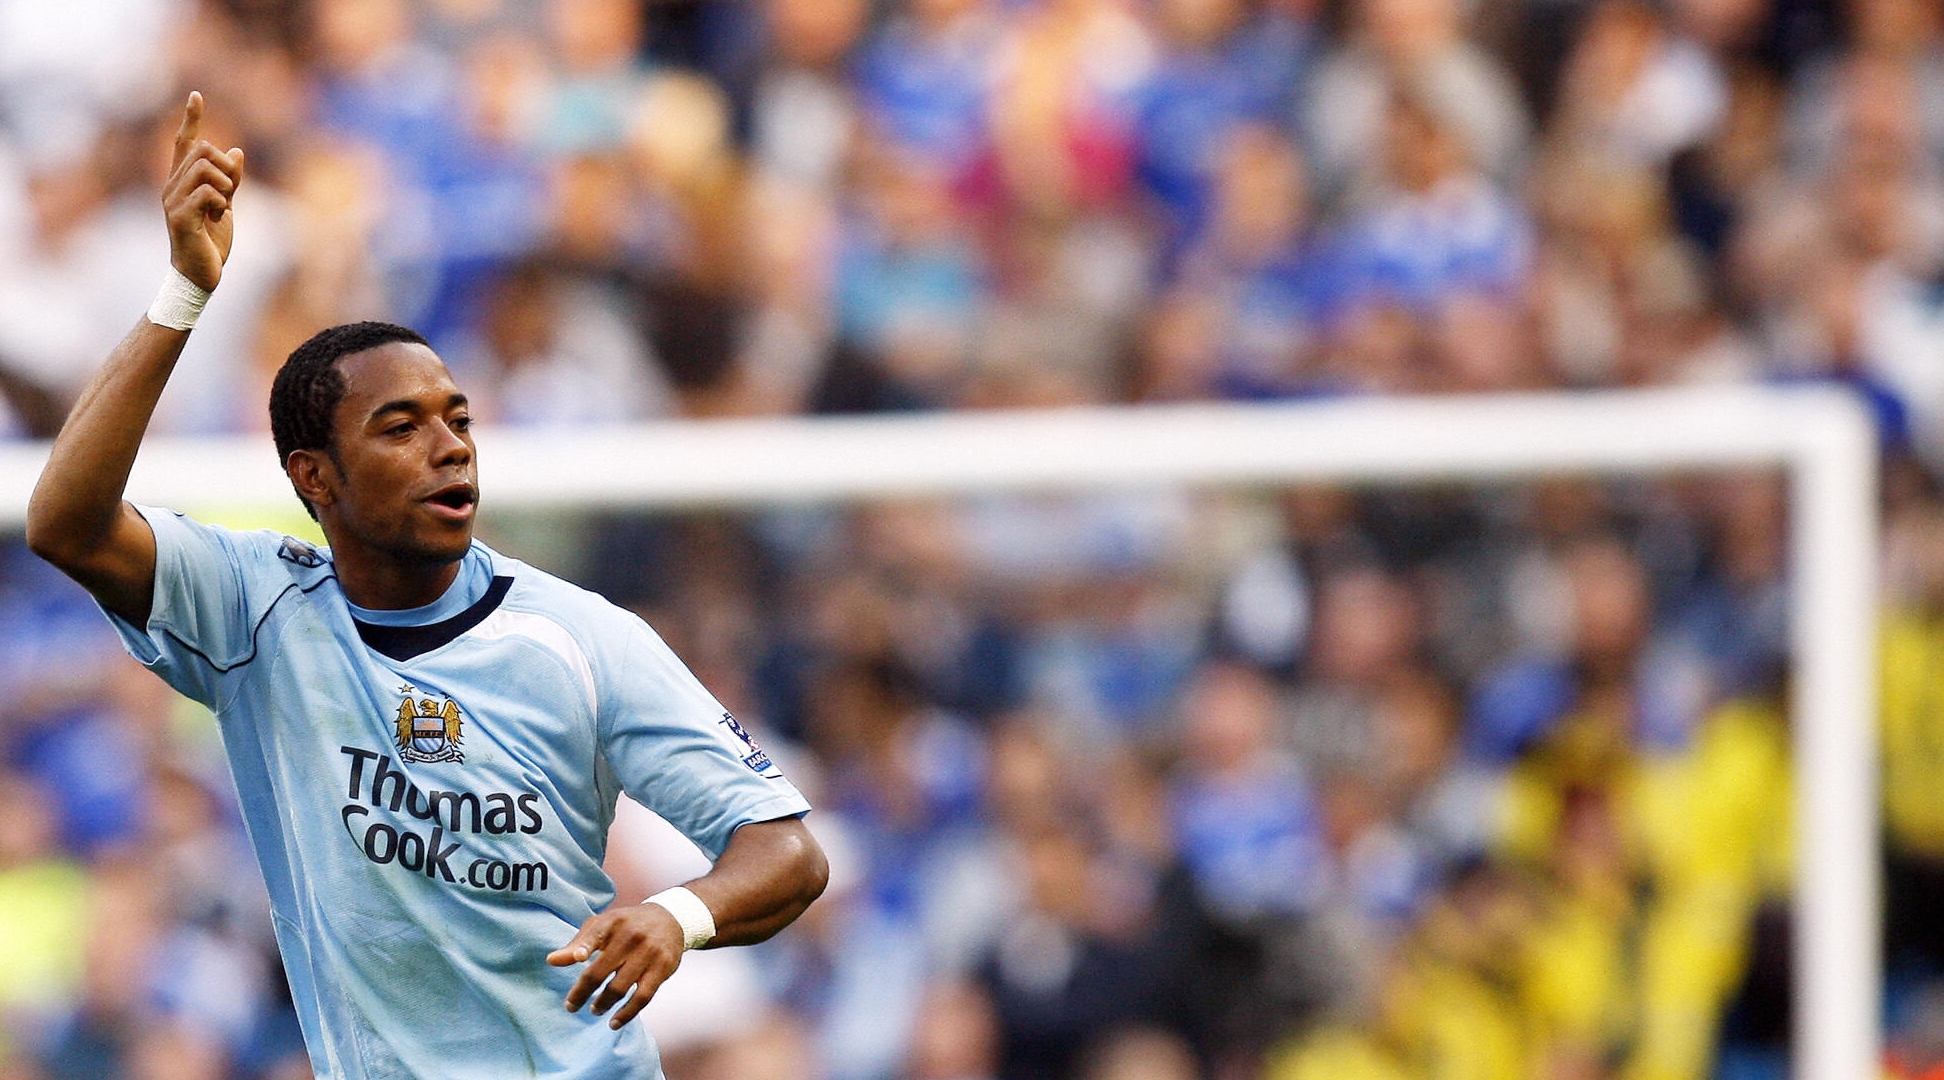 Manchester City's Brazilian forward Robinho celebrates after scoring against Chelsea during their English Premier League football match at The City of Manchester Stadium in Manchester, north west England on September 13, 2008. AFP PHOTO/ADRIAN DENNIS